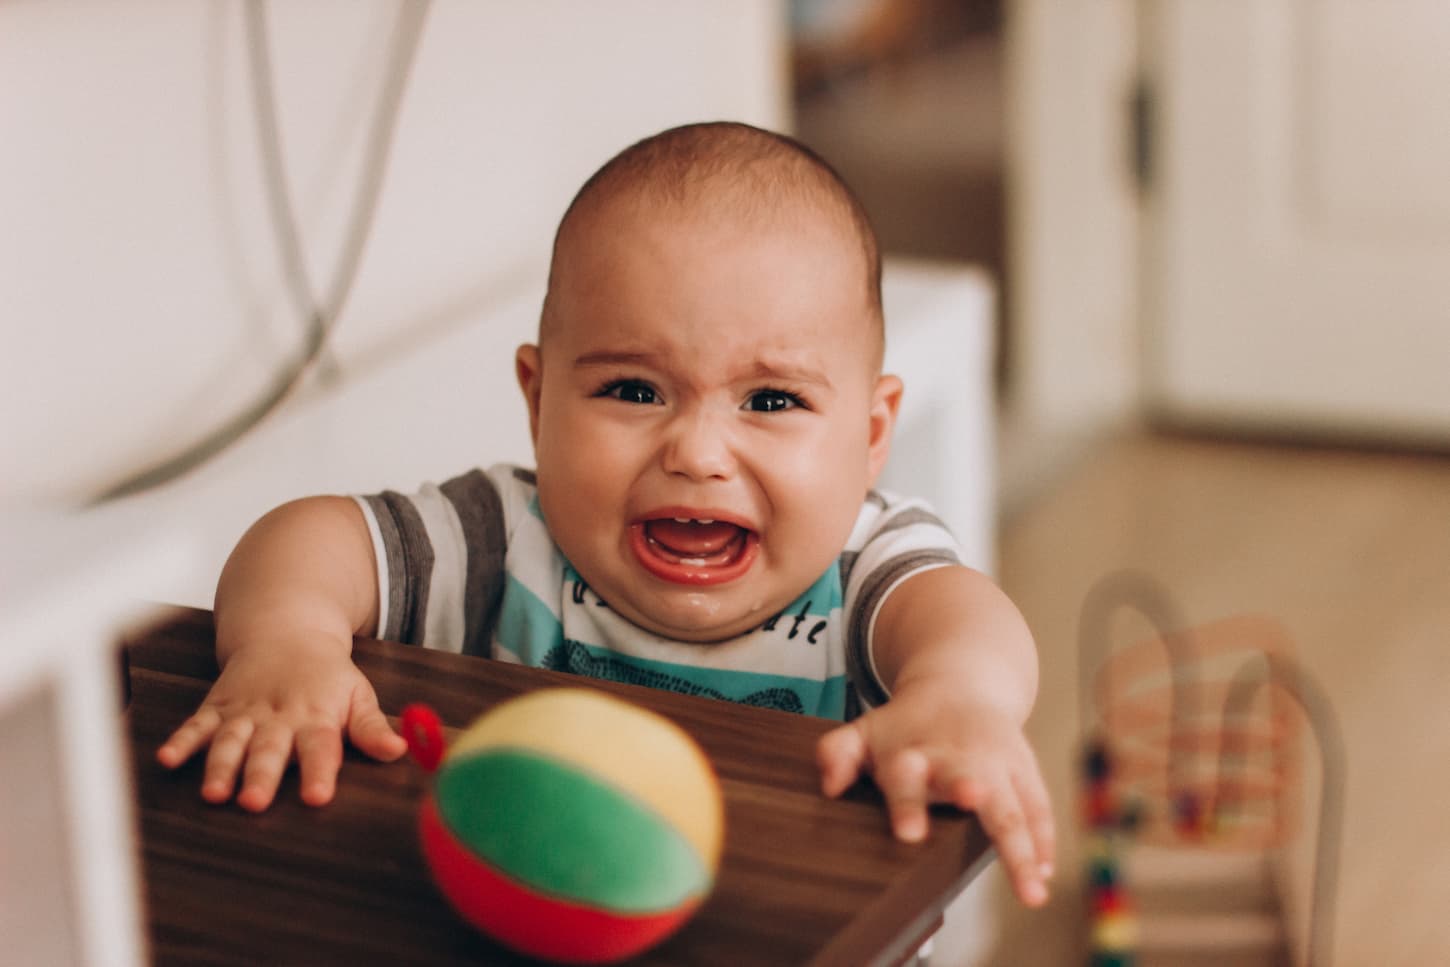 An image of a Crying little baby boy standing near a table reaching for his toy.